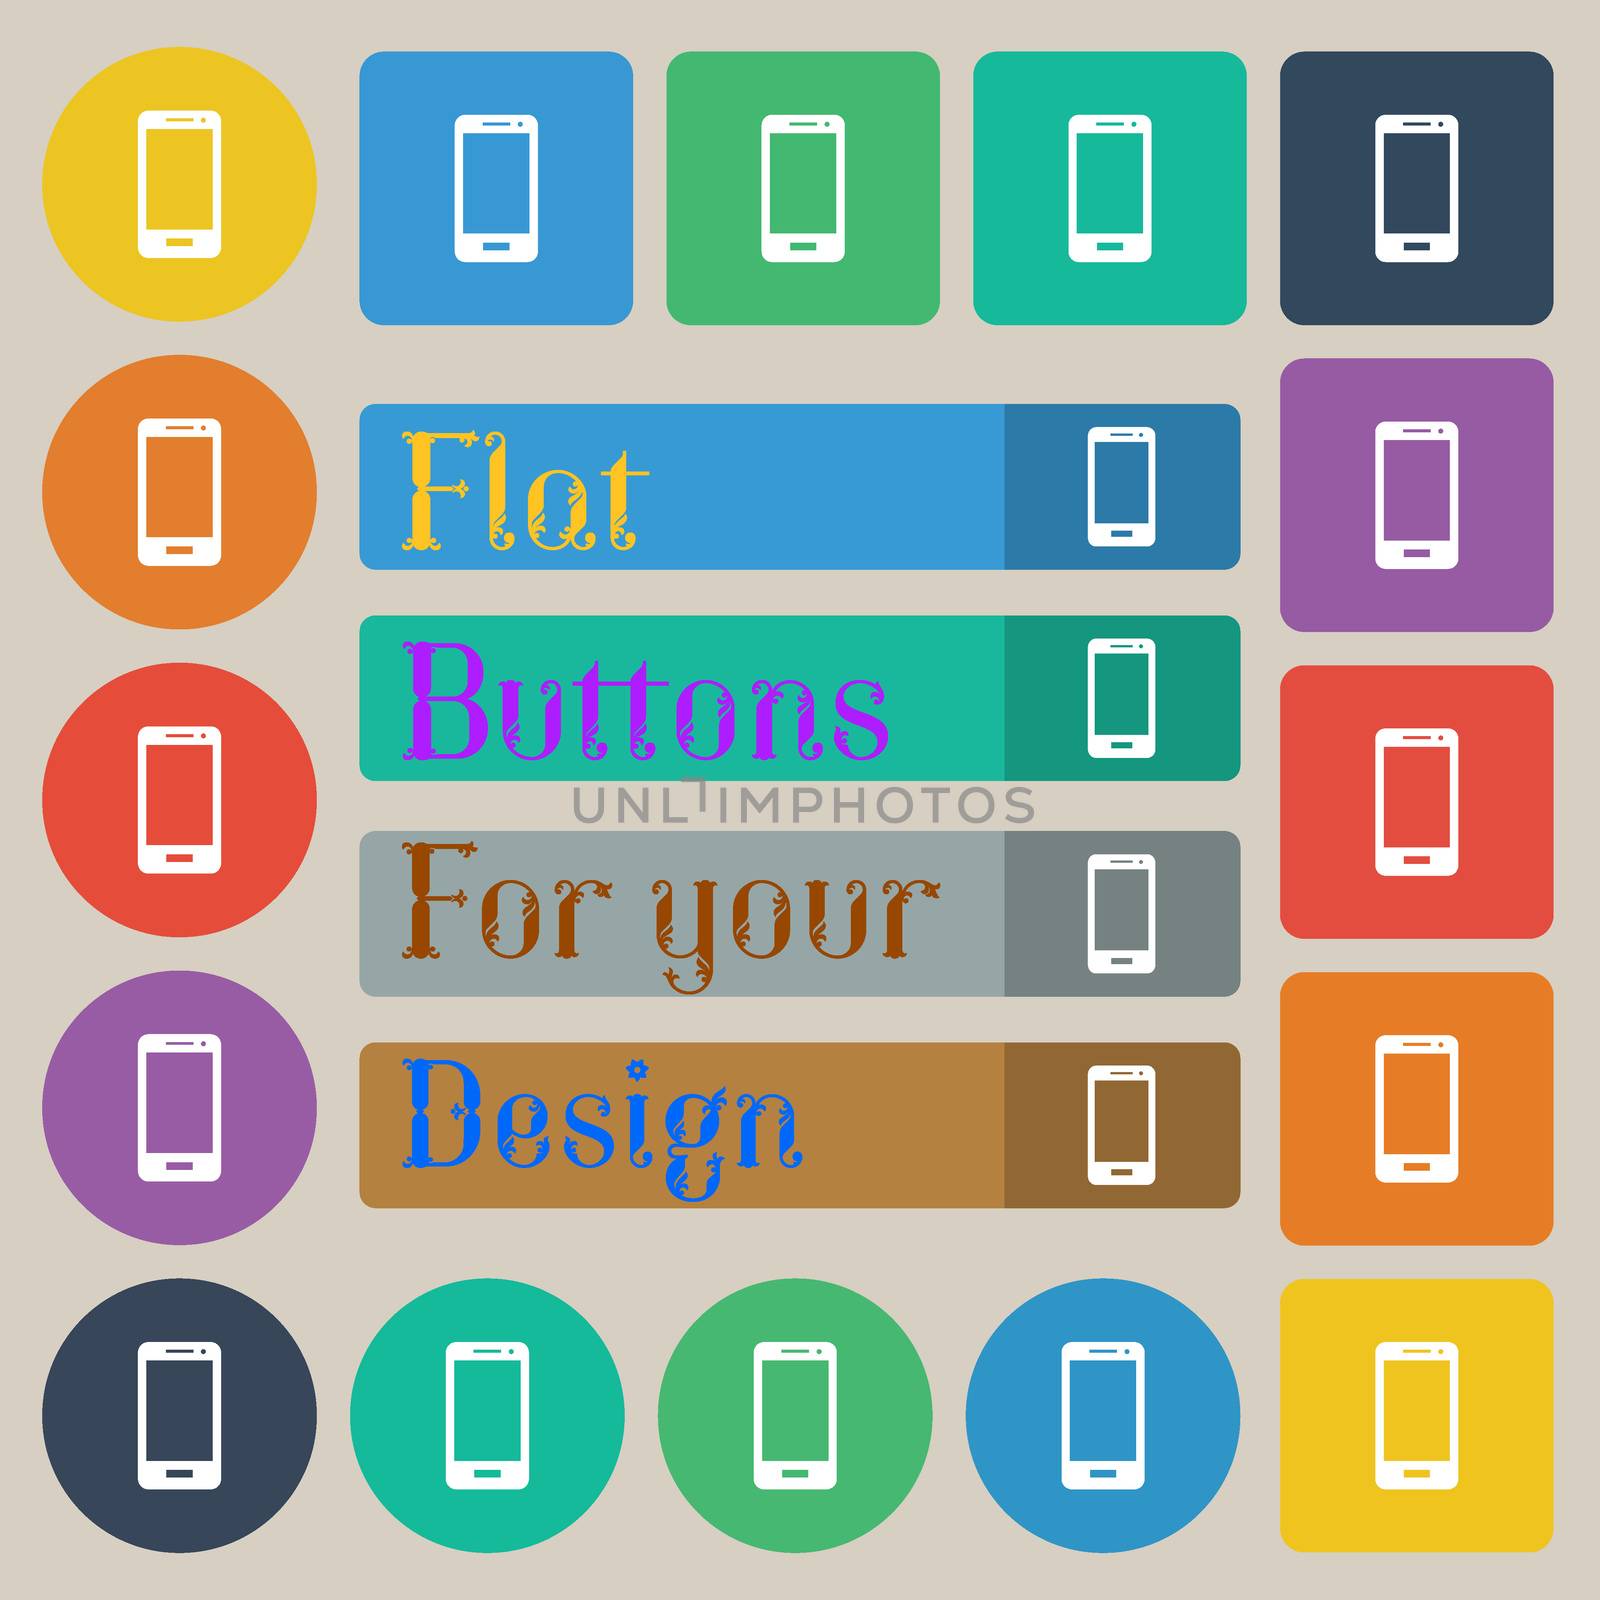 Smartphone sign icon. Support symbol. Call center. Set of twenty colored flat, round, square and rectangular buttons. illustration